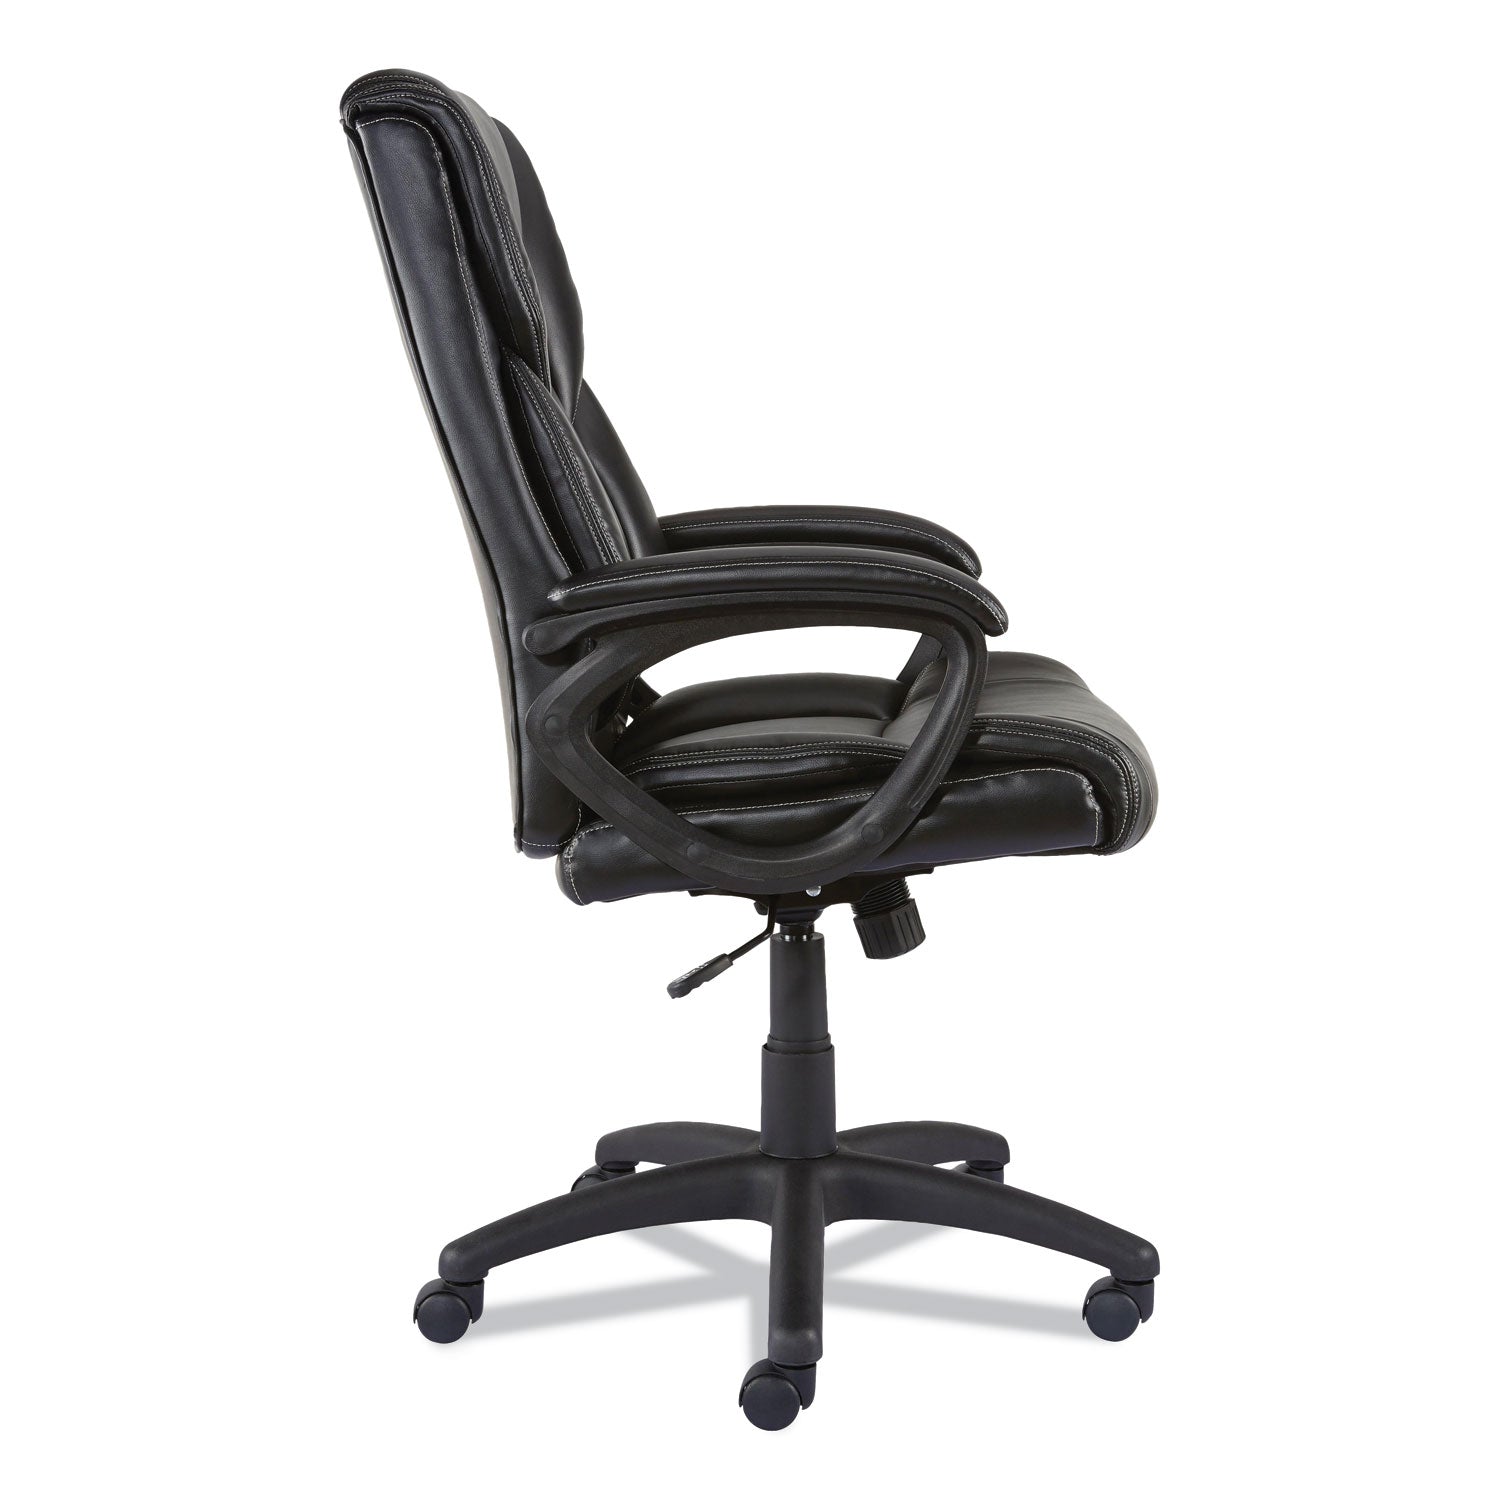 Alera Brosna Series Mid-Back Task Chair, Supports Up to 250 lb, 18.15" to 21.77 Seat Height, Black Seat/Back, Black Base - 4